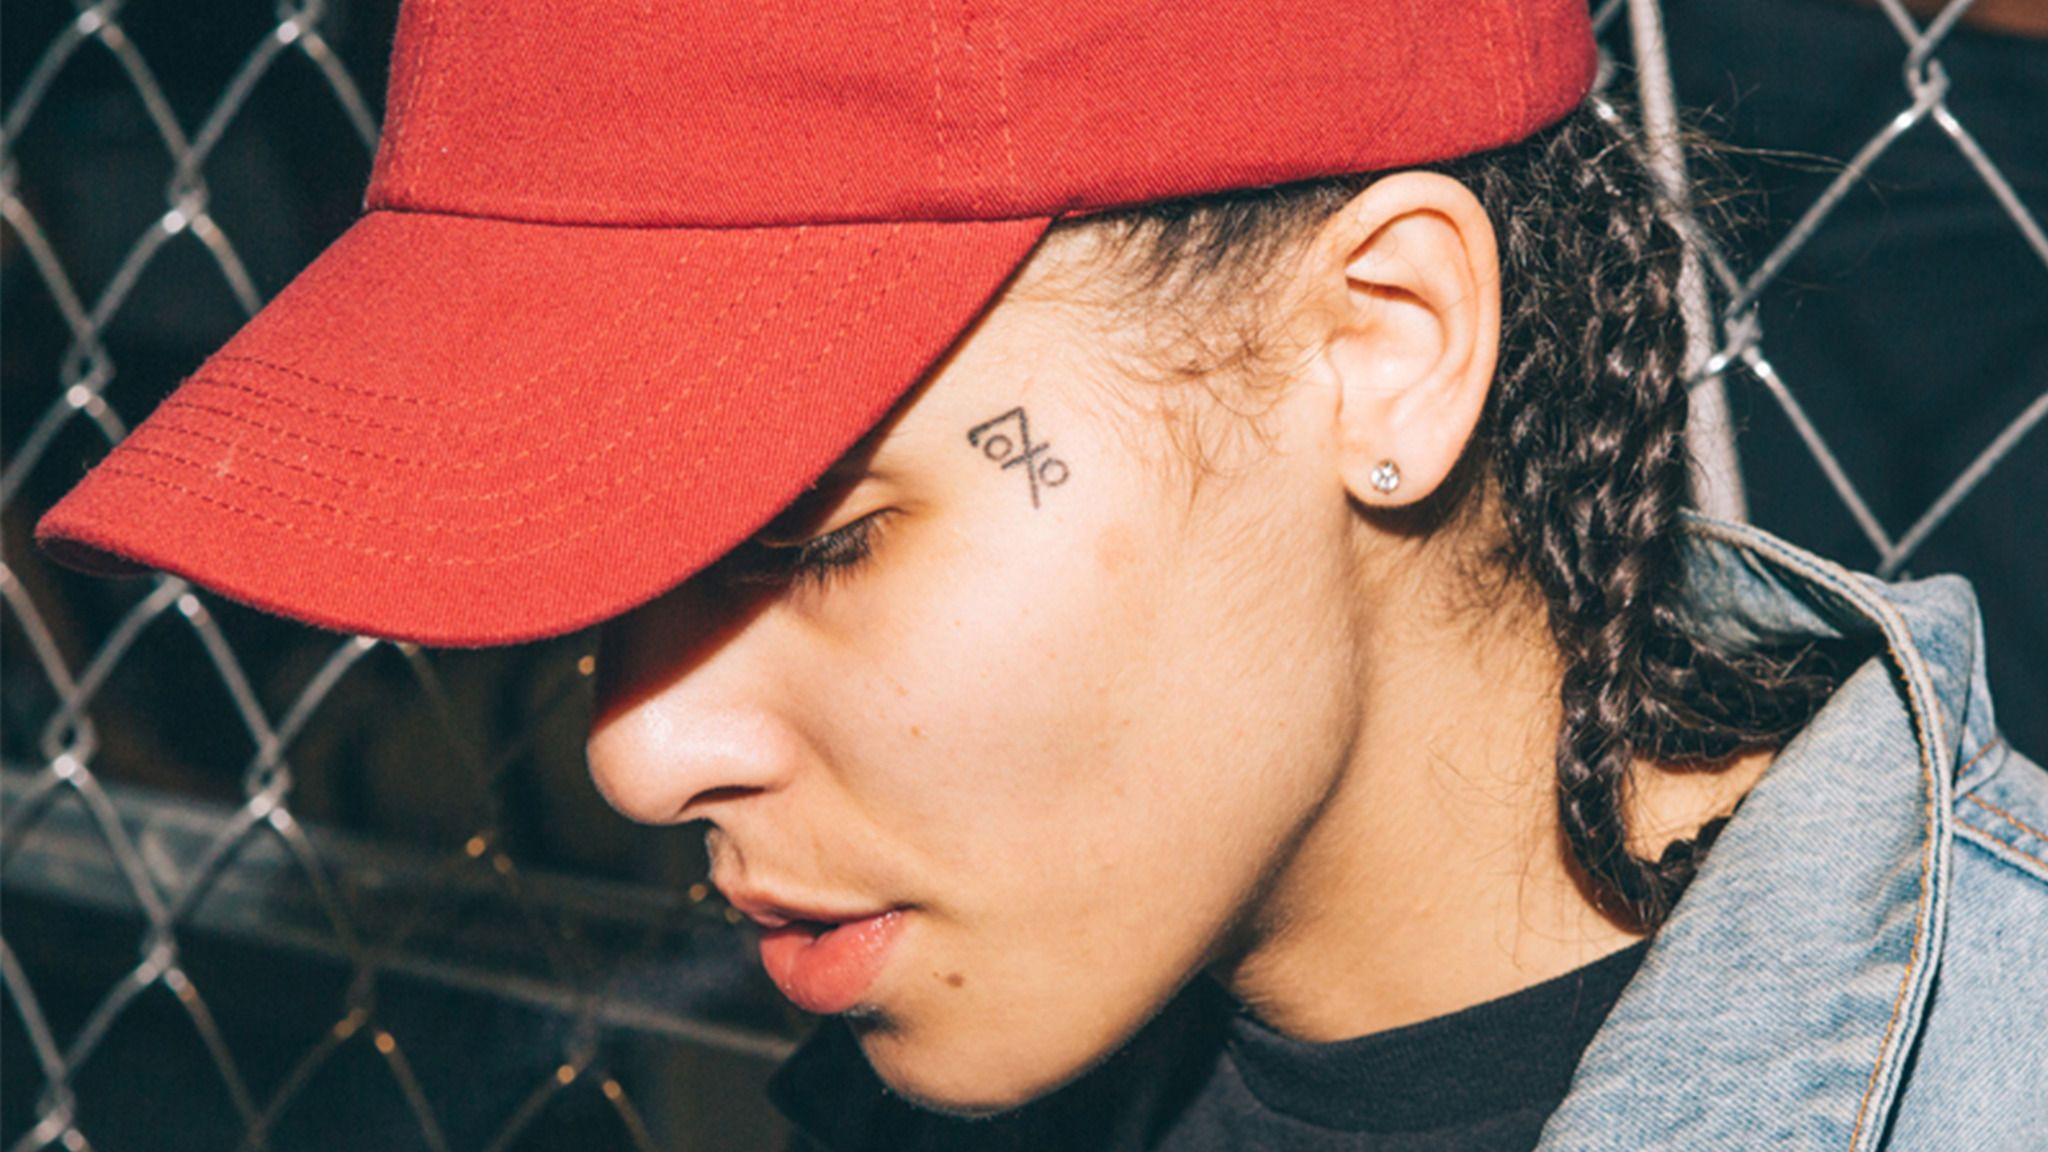 070Shake at Irving Plaza. WBAB Events Events